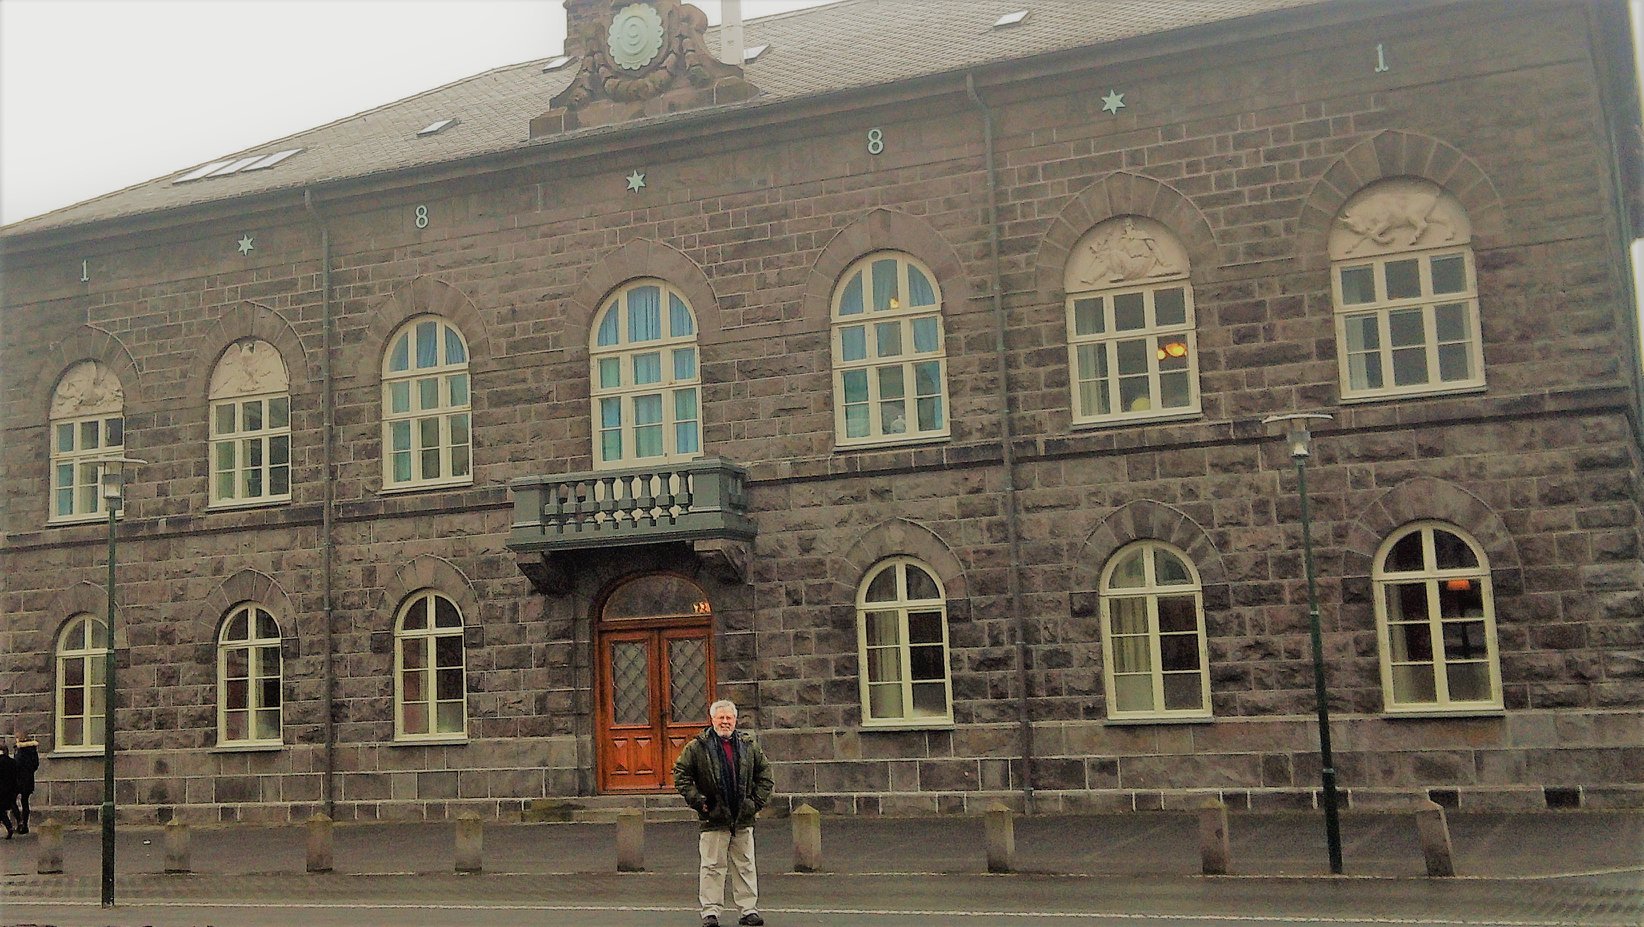 Byrd poses with the Althing, the Parliament of Iceland. He stated: “The Althing, the Parliament of Iceland, is the oldest such body on earth, having existed for well over 1000 years.”